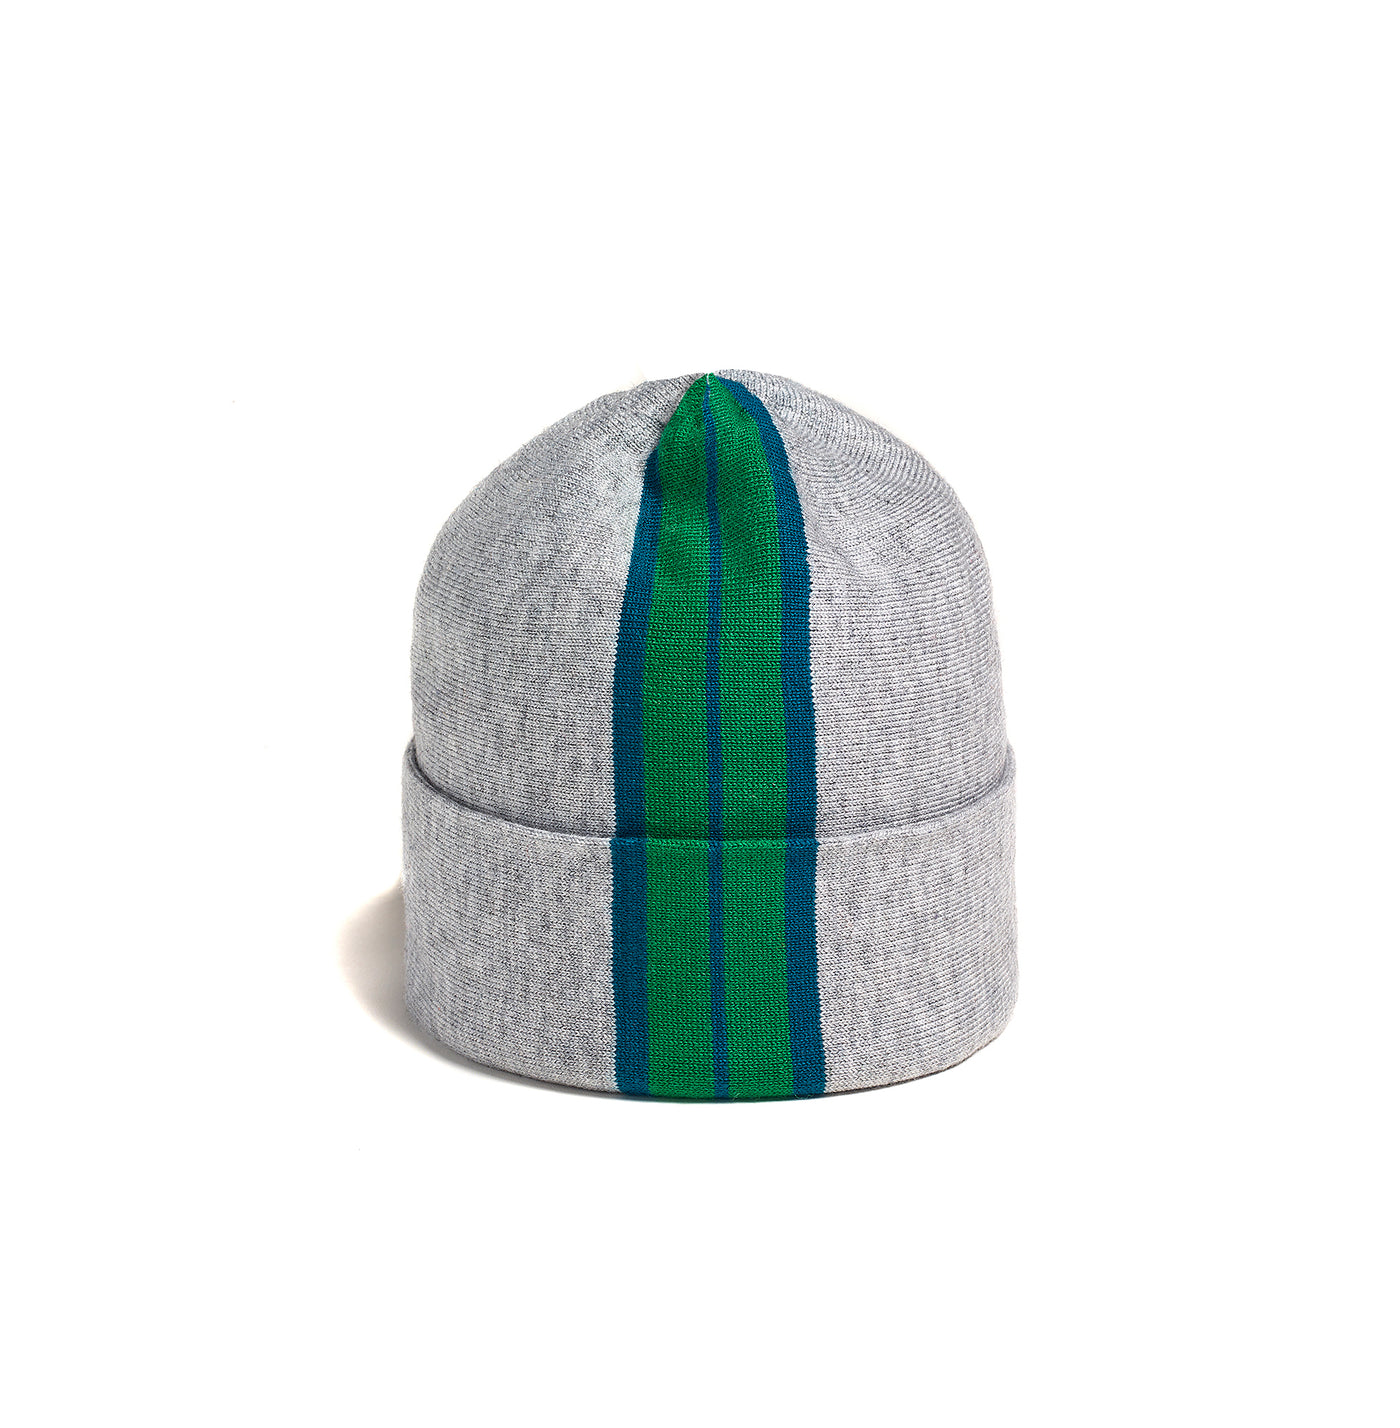 The White Spruce Hat